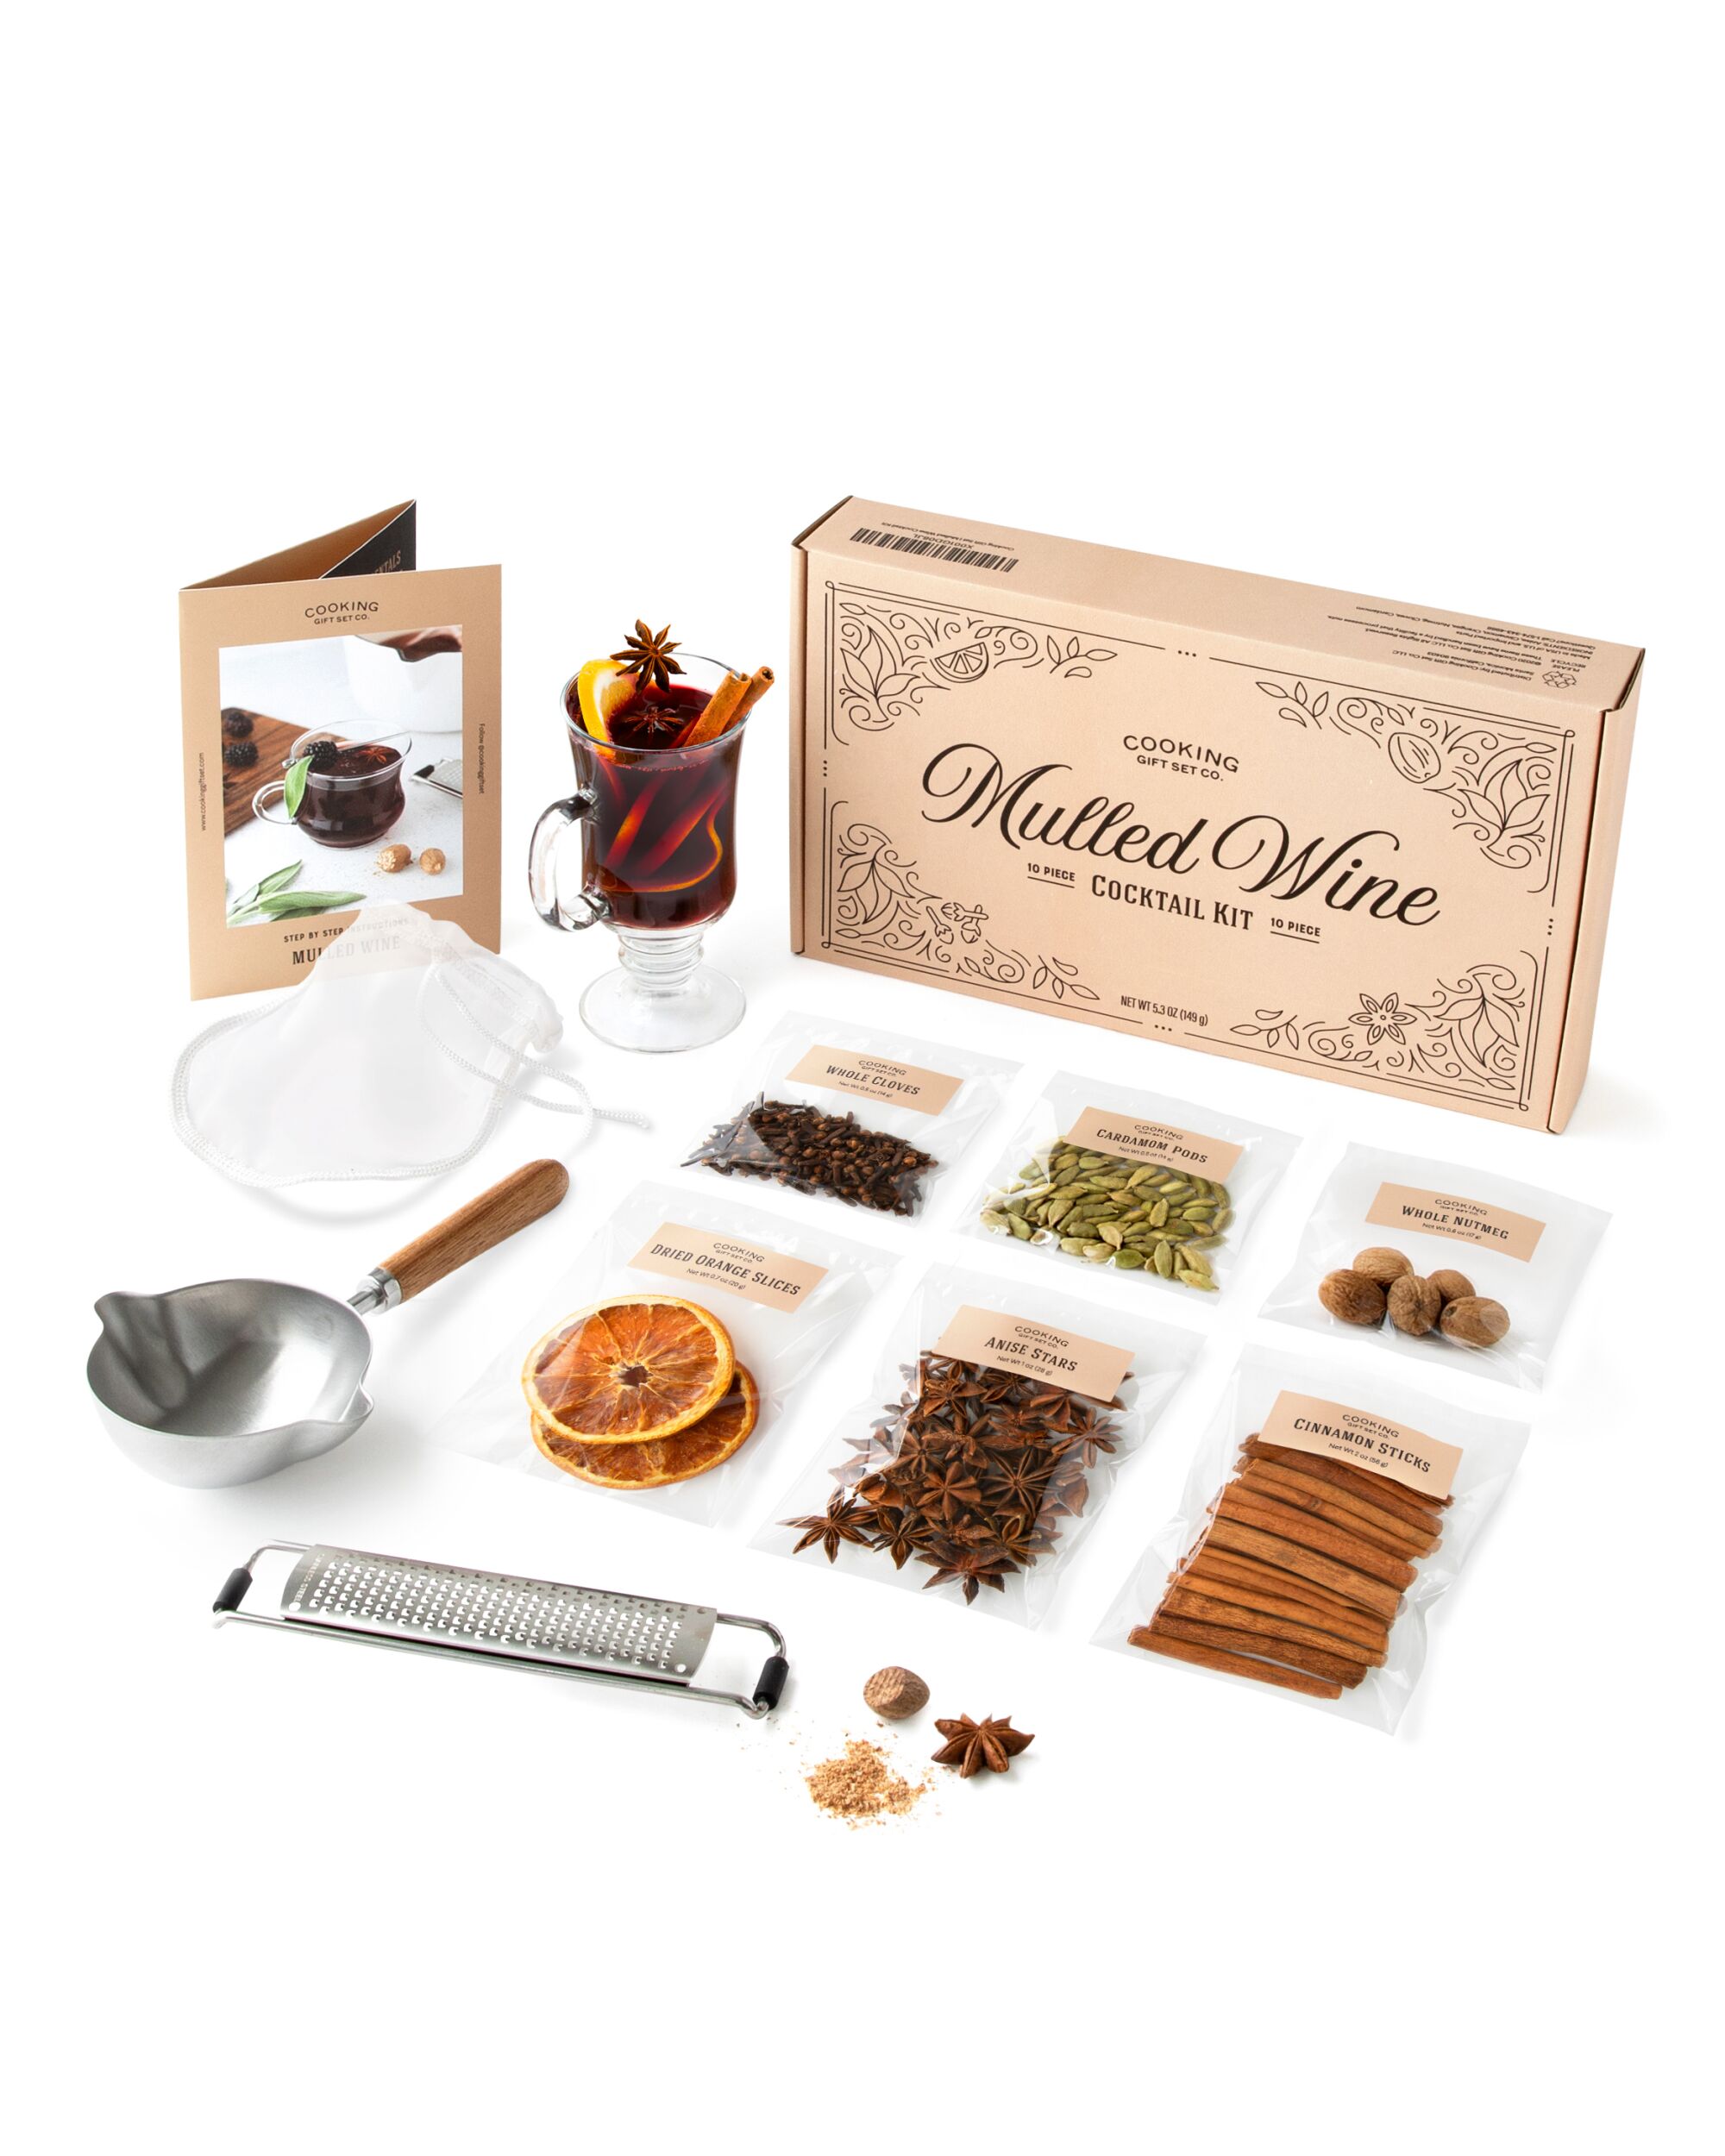 A Mulled Wine Cocktail Kit from Cooking Gift Set Co.